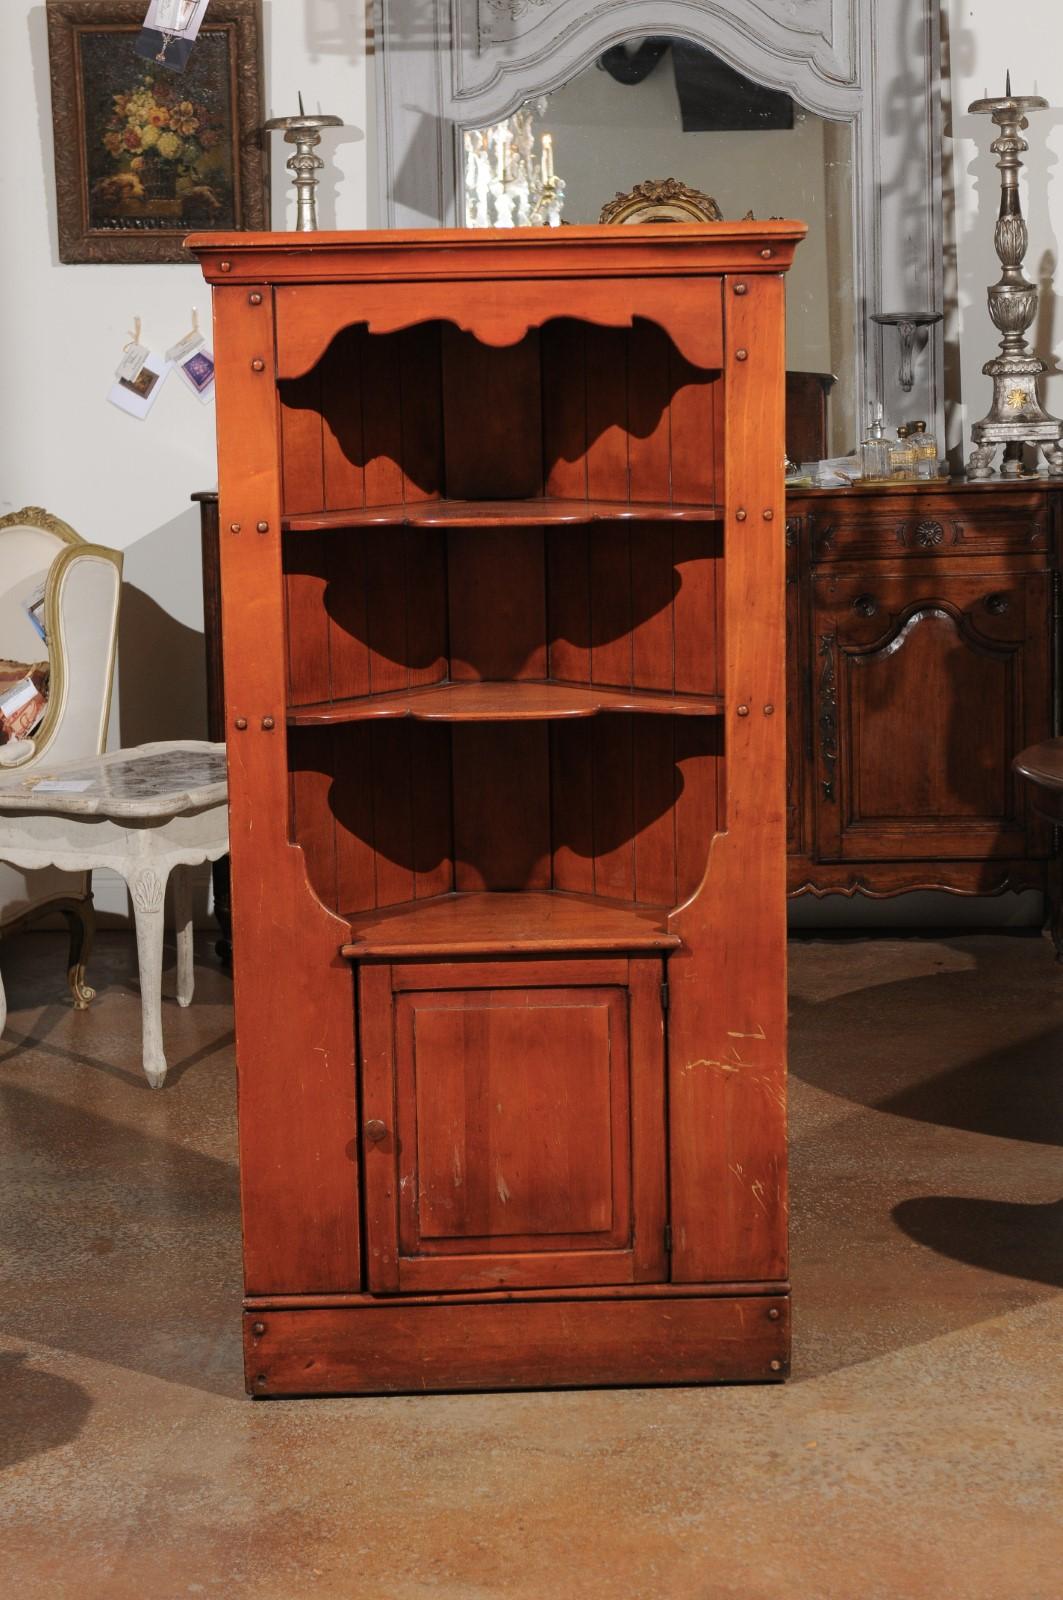 An American cherry corner cabinet from the early 20th century, with open shelves, single door and scalloped accents. Made in the USA during the early years of the 20th century, this corner cabinet features a beveled cornice sitting above three